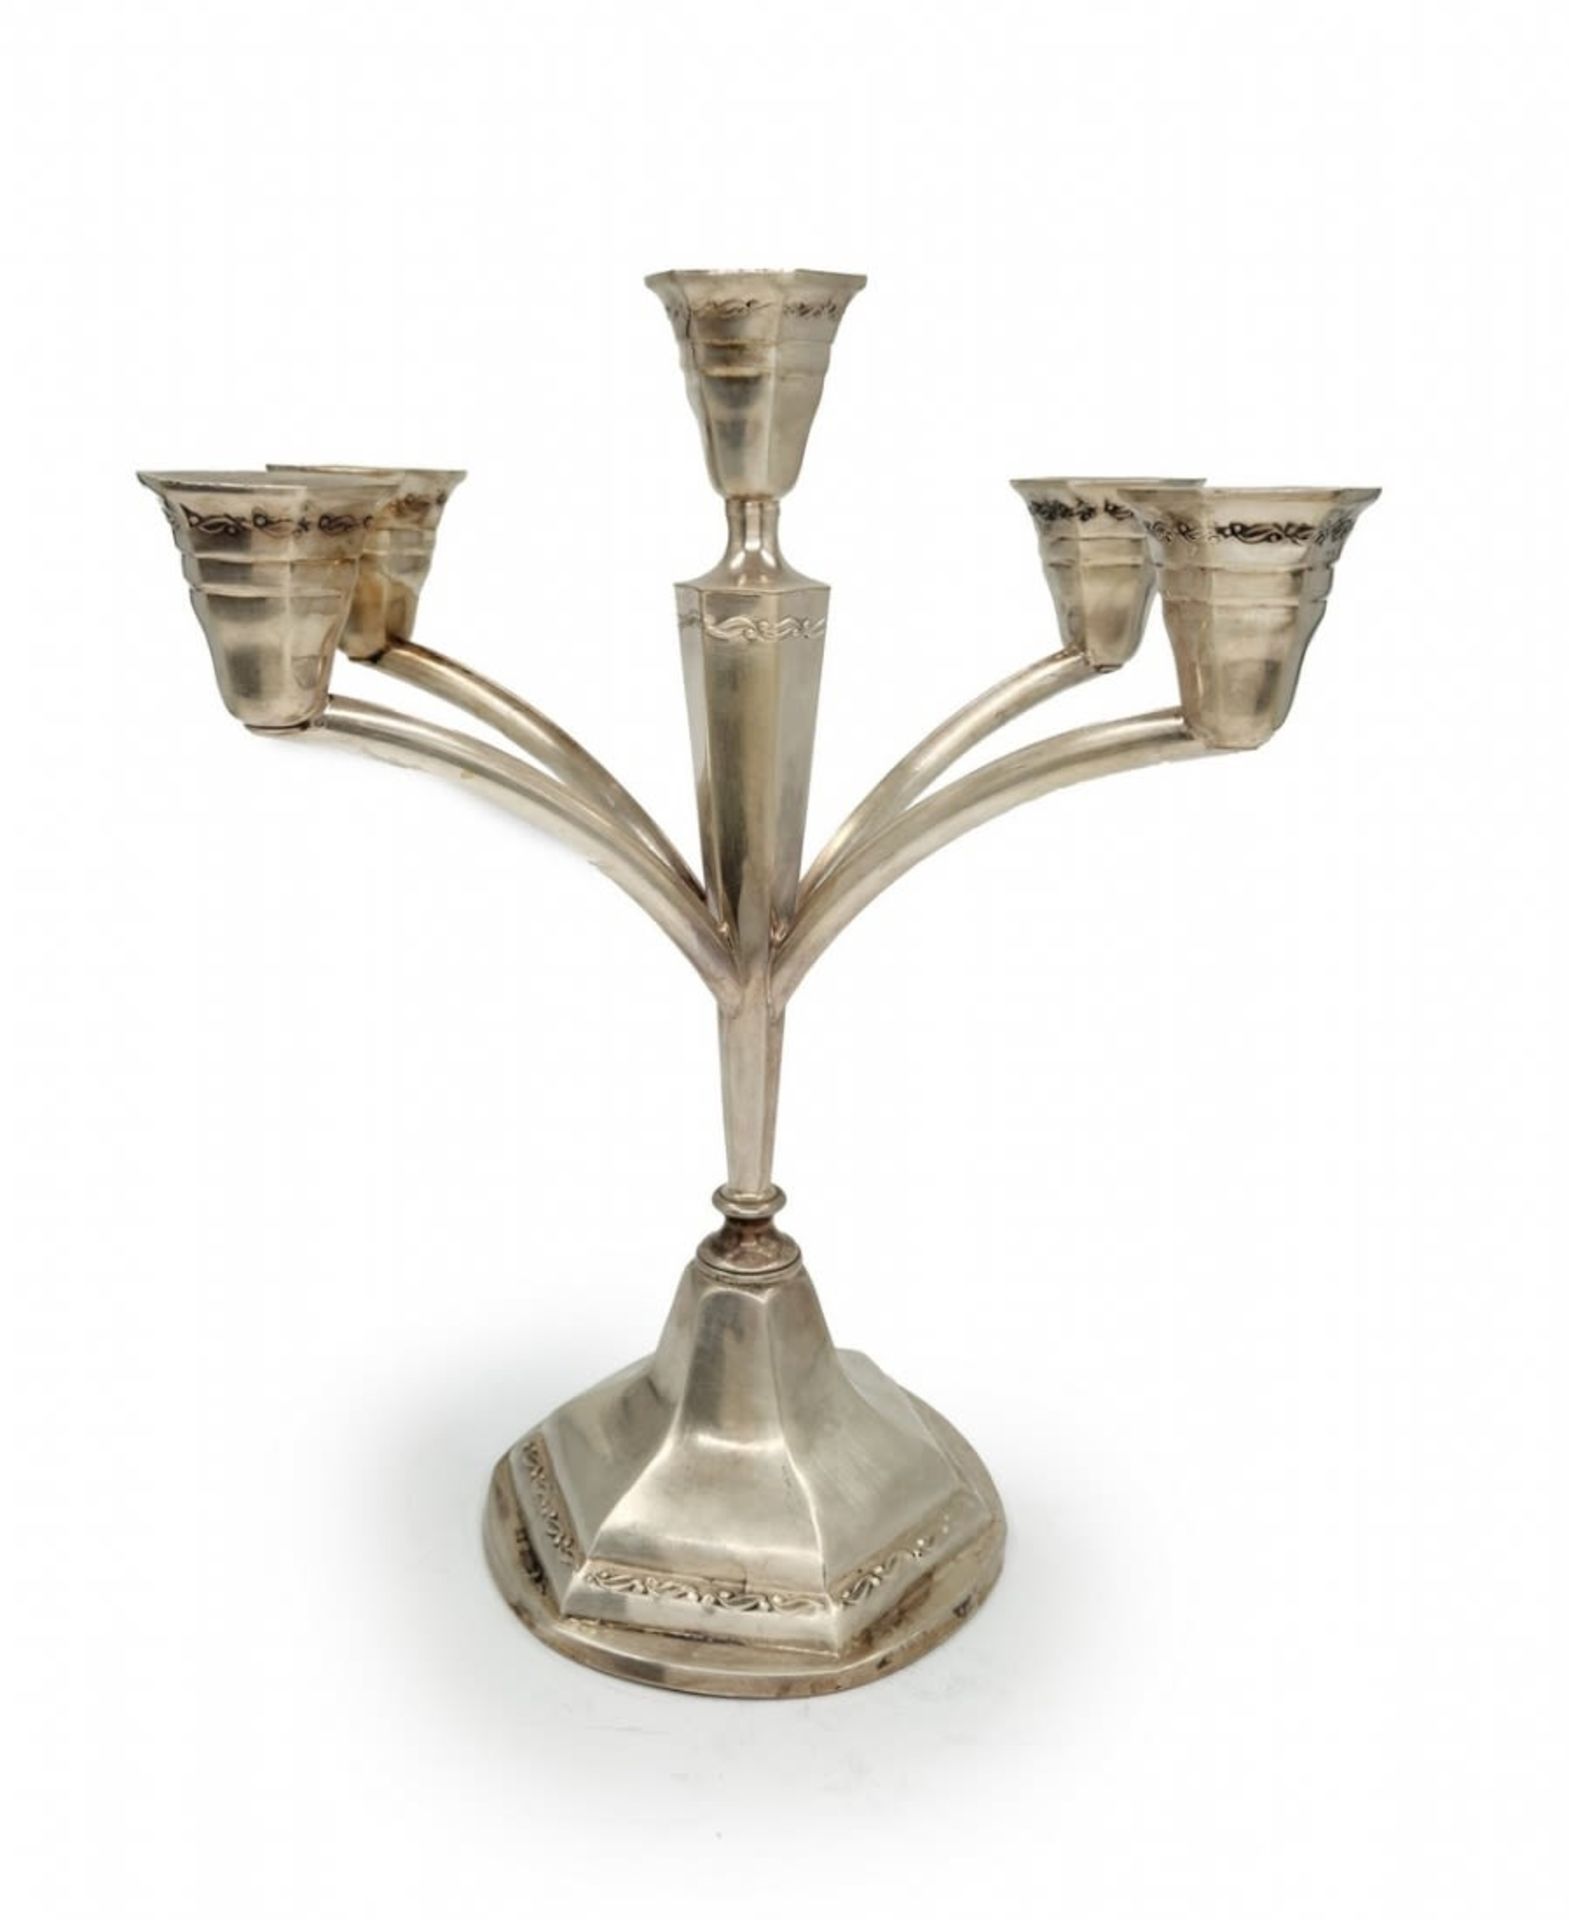 A silver candlestick for five candles, made by the 'Hazorifim' company, made of '800' silver, - Image 2 of 8